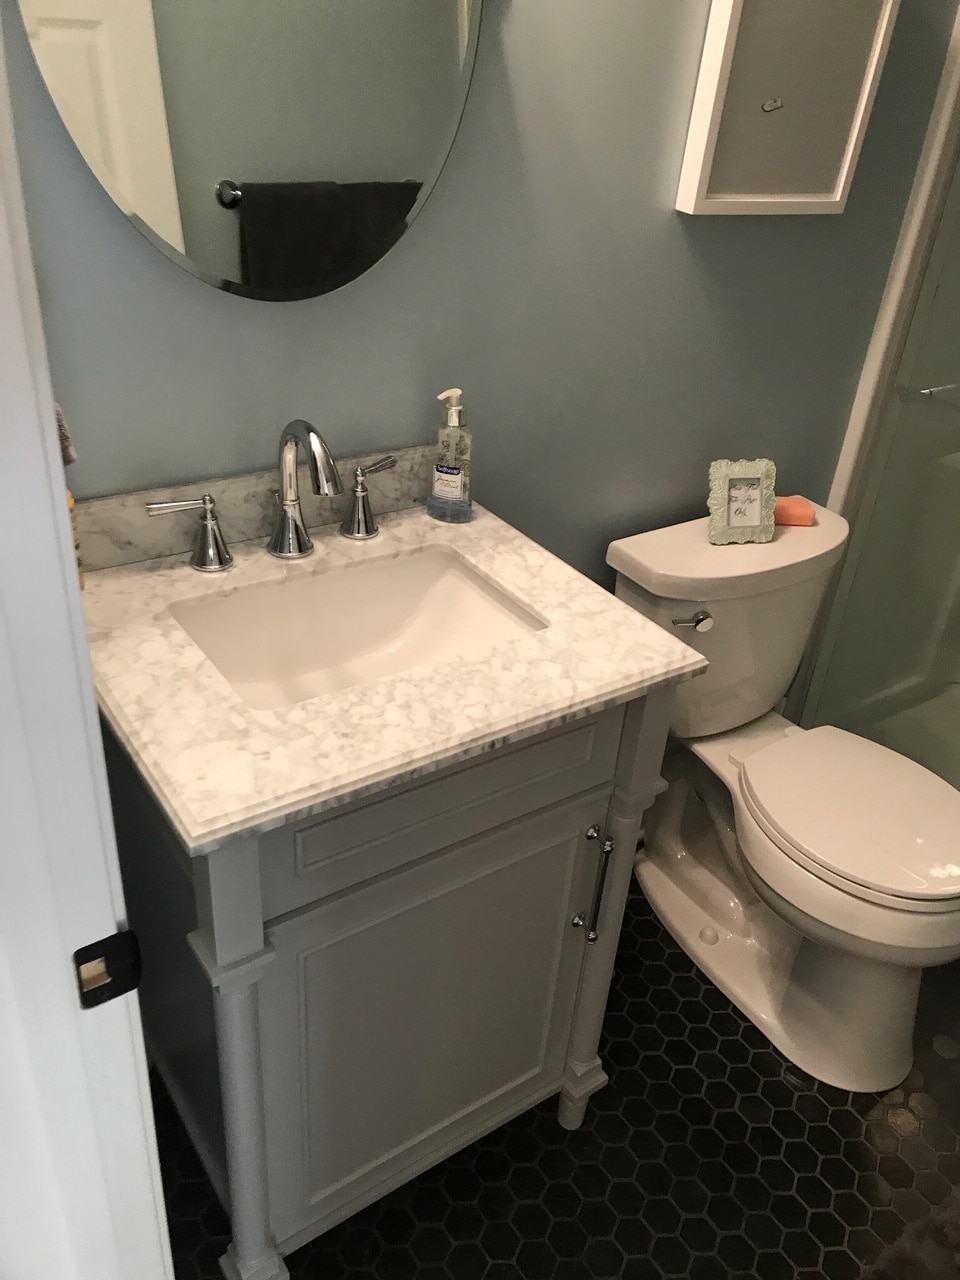 Bathroom Renovations Connecticut Remodel Ideas - How Much Does A Bathroom Remodel Cost Reddit